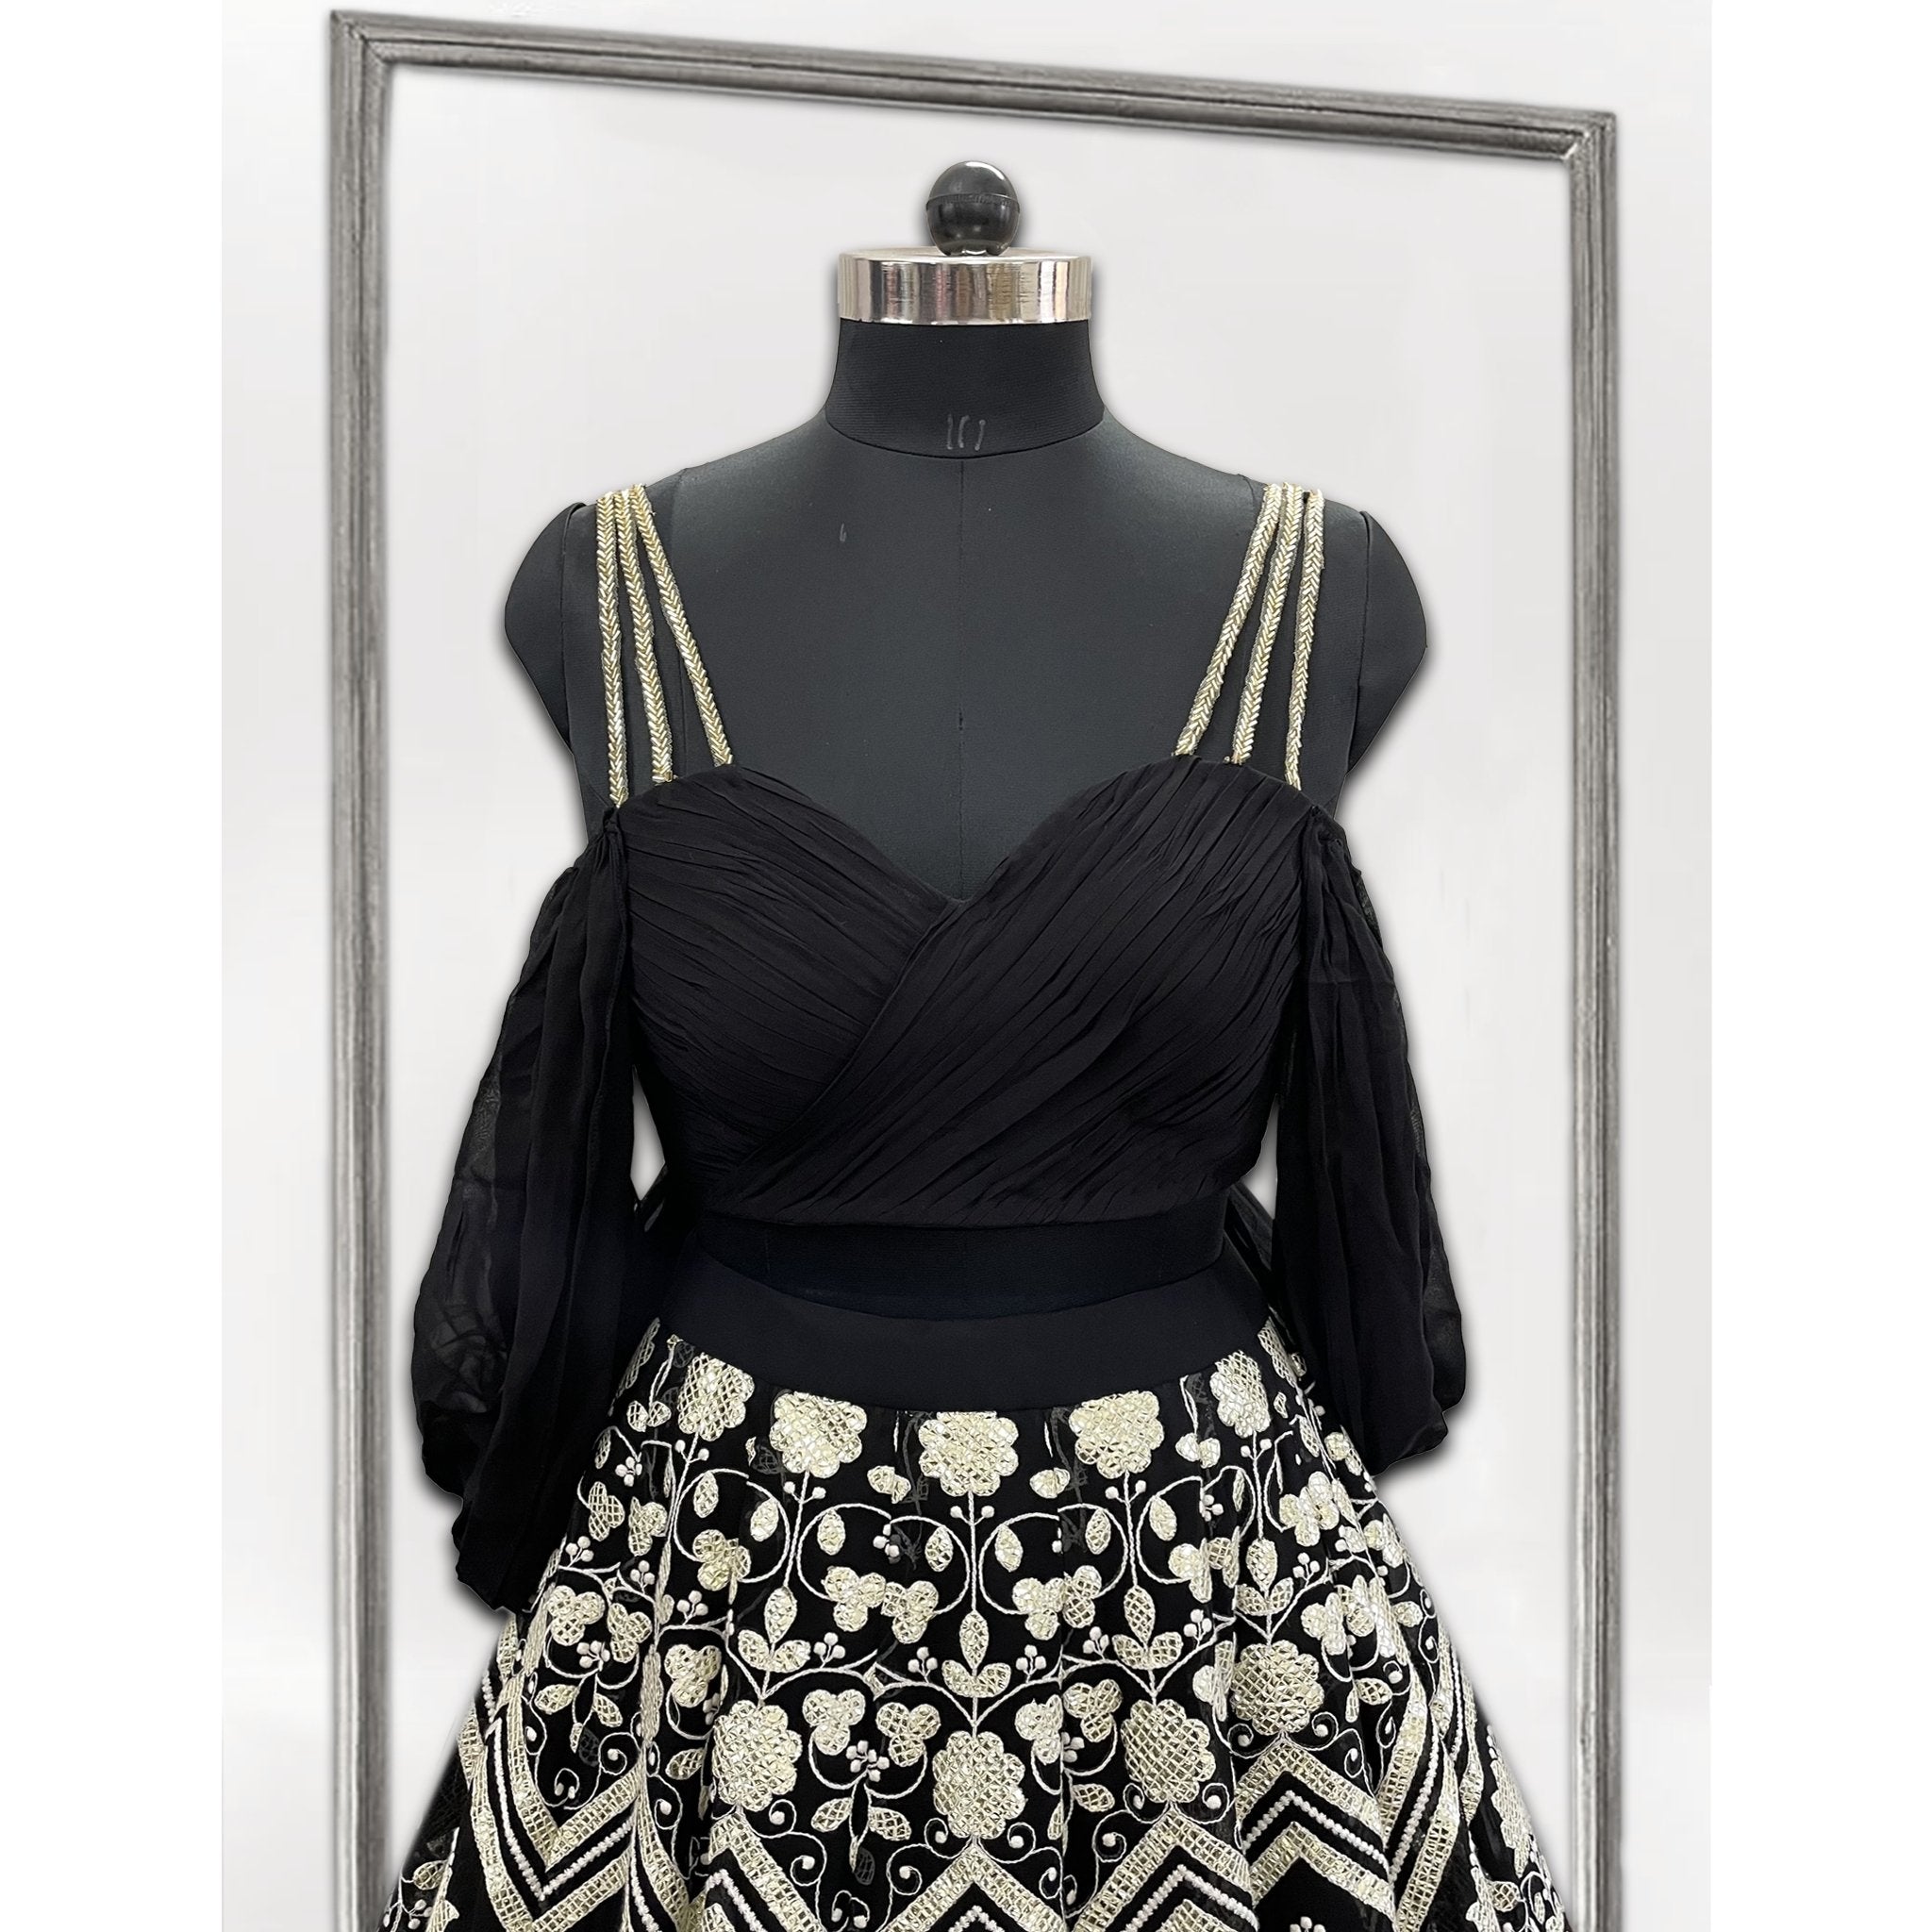 Eclectic Black Lehenga with Draped blouse - Indian Designer Bridal Wedding Outfit